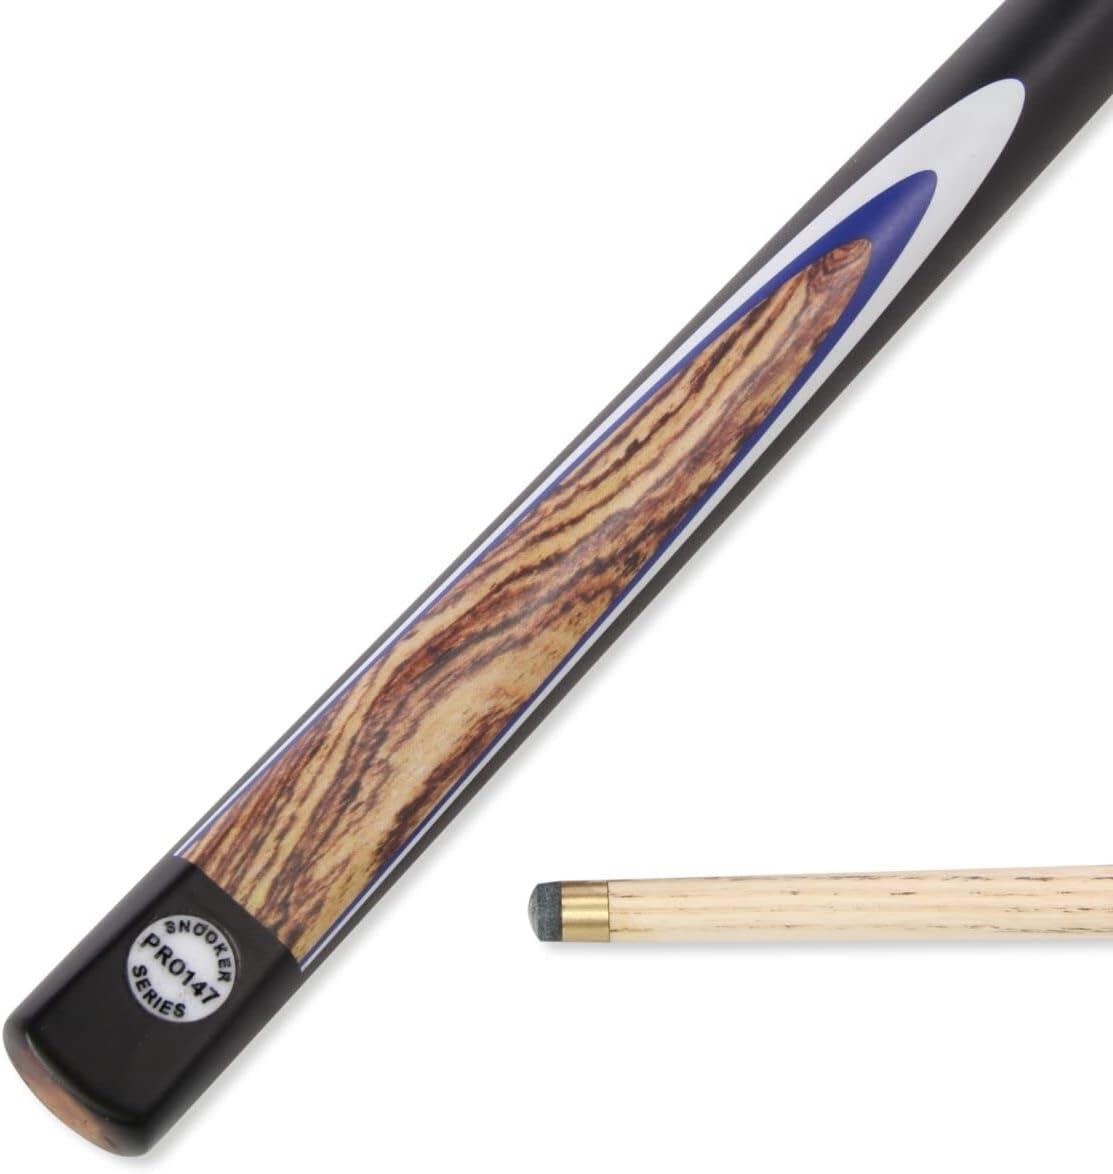 FUNKY CHALK Pro147 Kingwood 3pc Snooker Pool Cue 57 Inch with Matching Ash Grain 9.5mm Tip